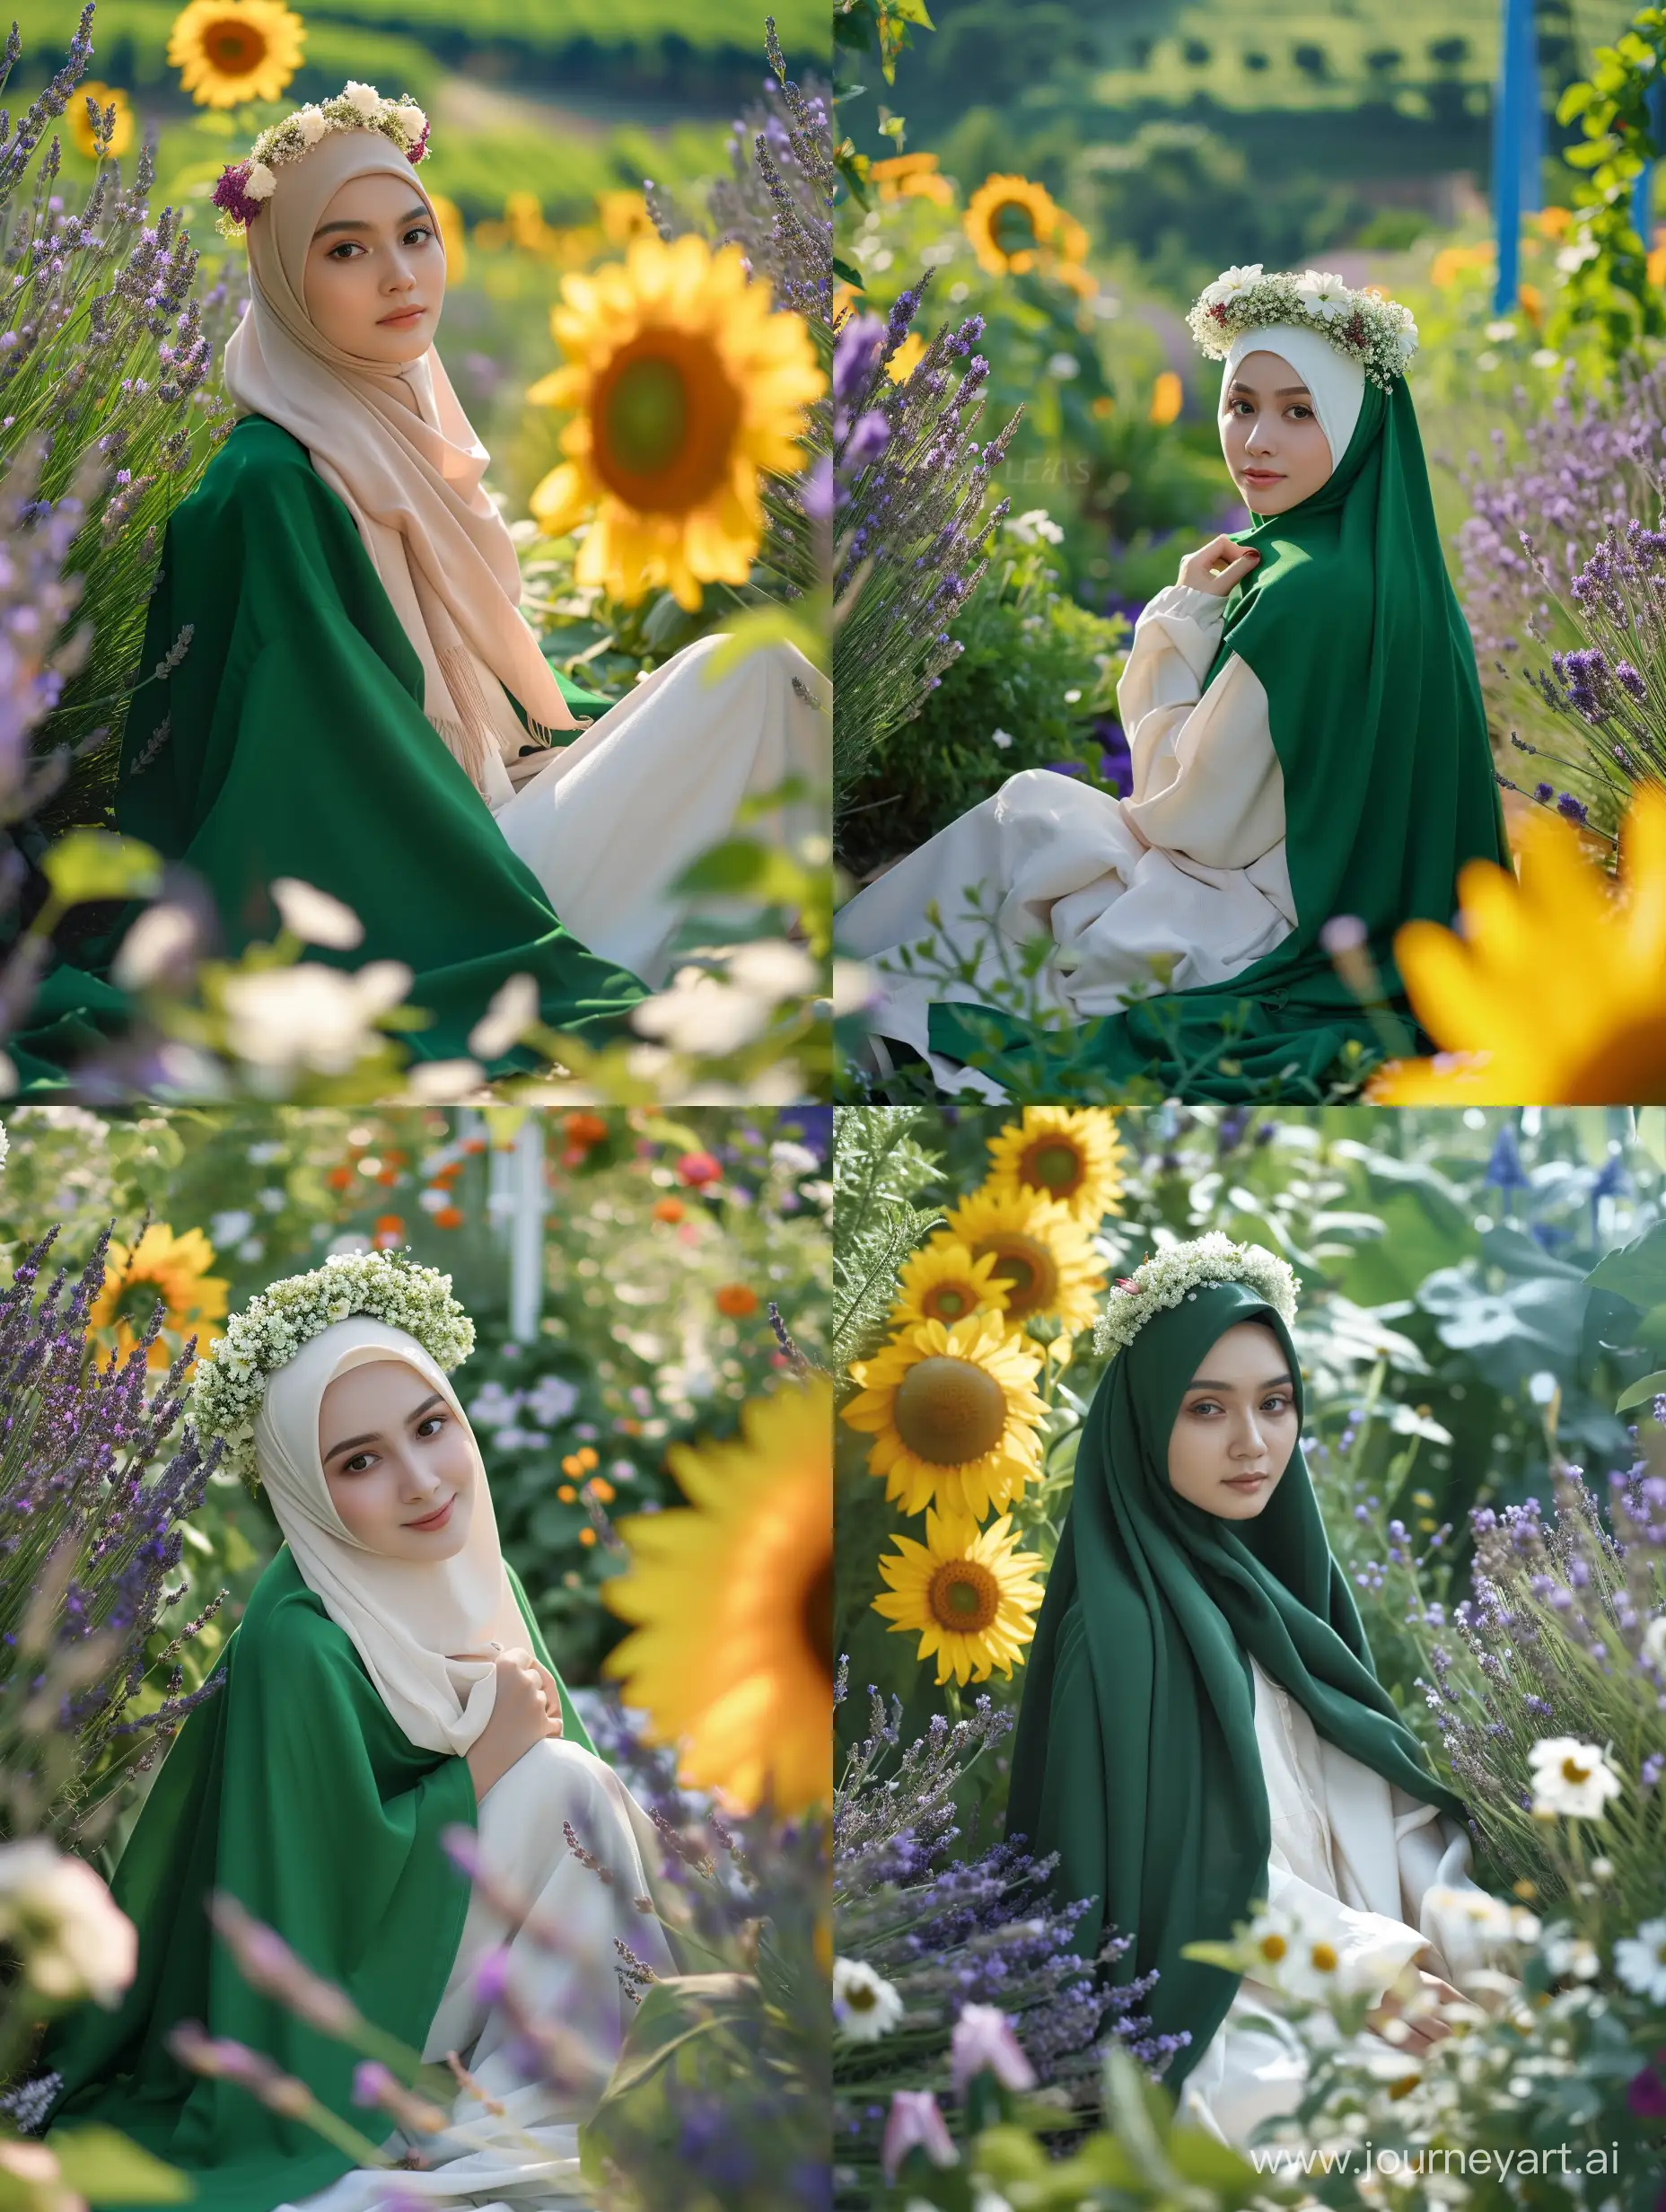 Indonesian-Woman-in-Green-and-White-Hijab-Amidst-Flower-Garden